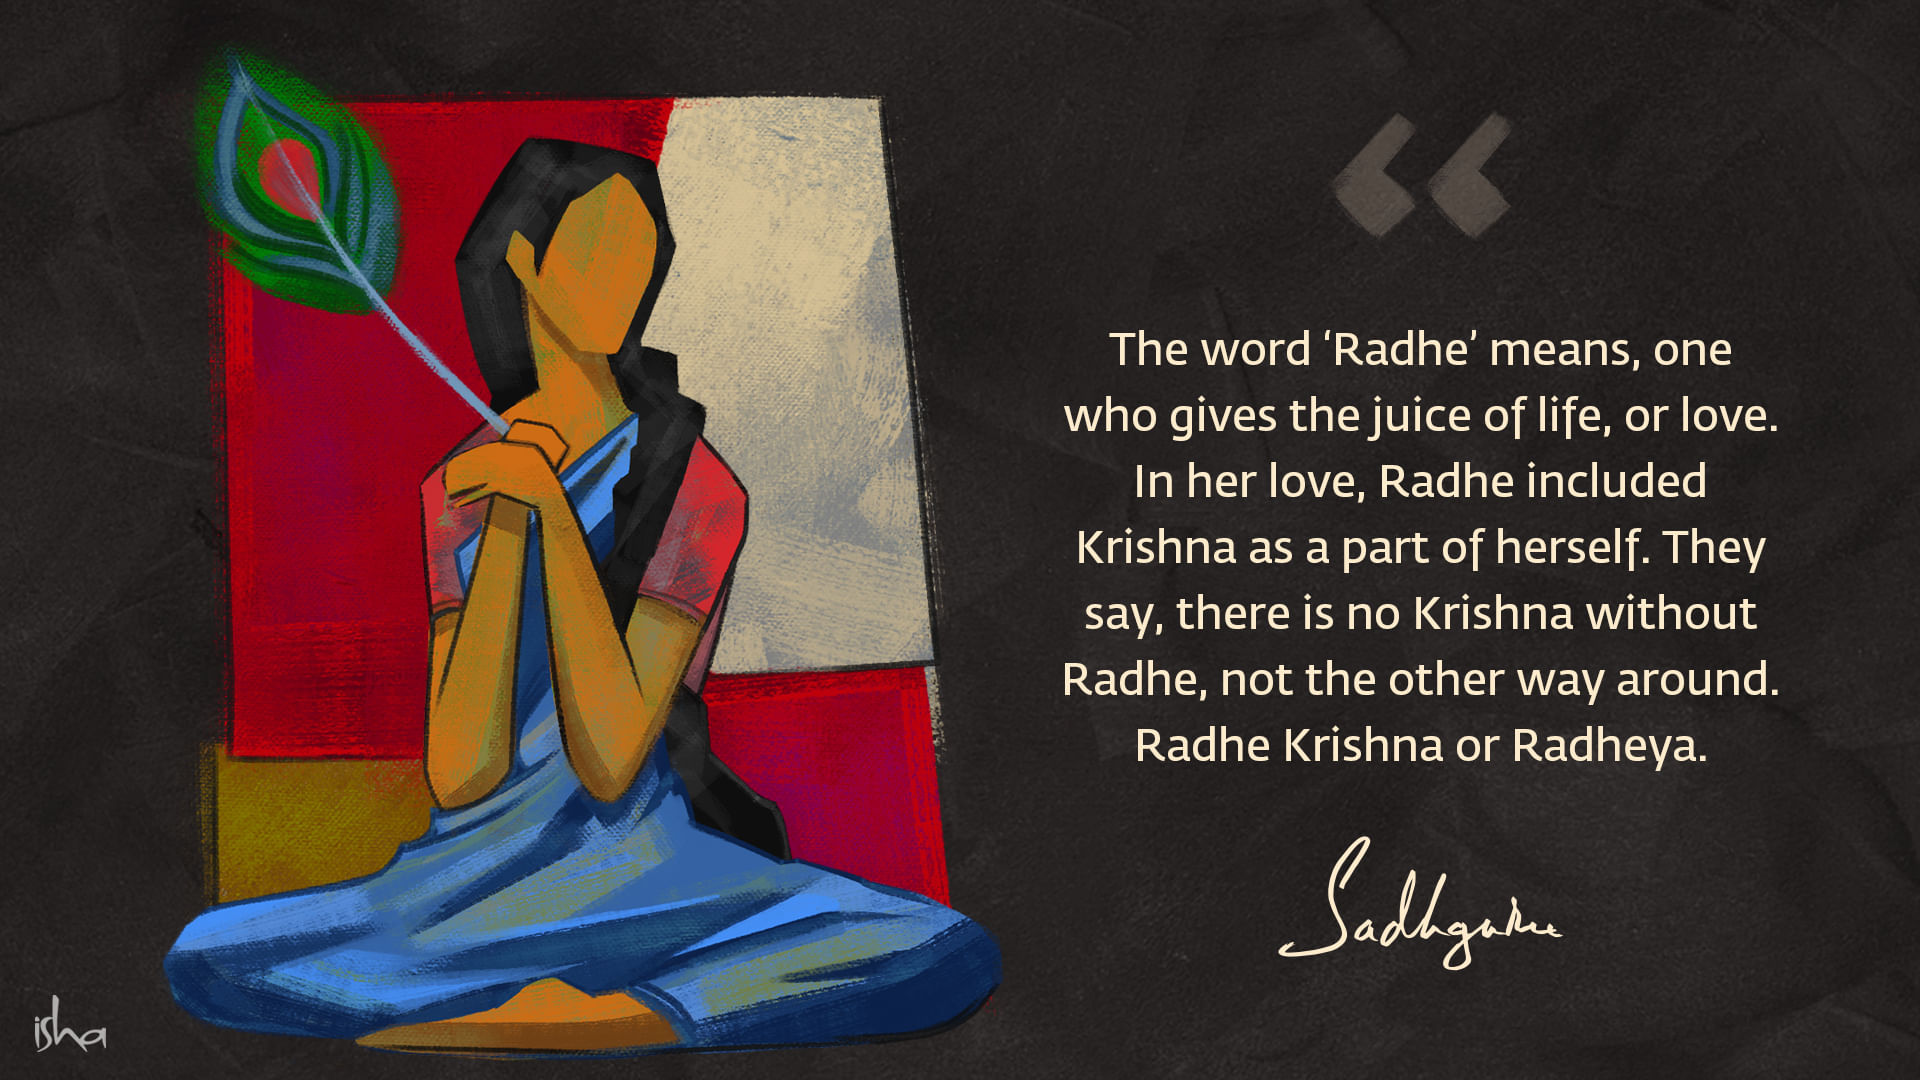 Krishna quote from Sadhguru with abstract Radhe holding a peacock feather.